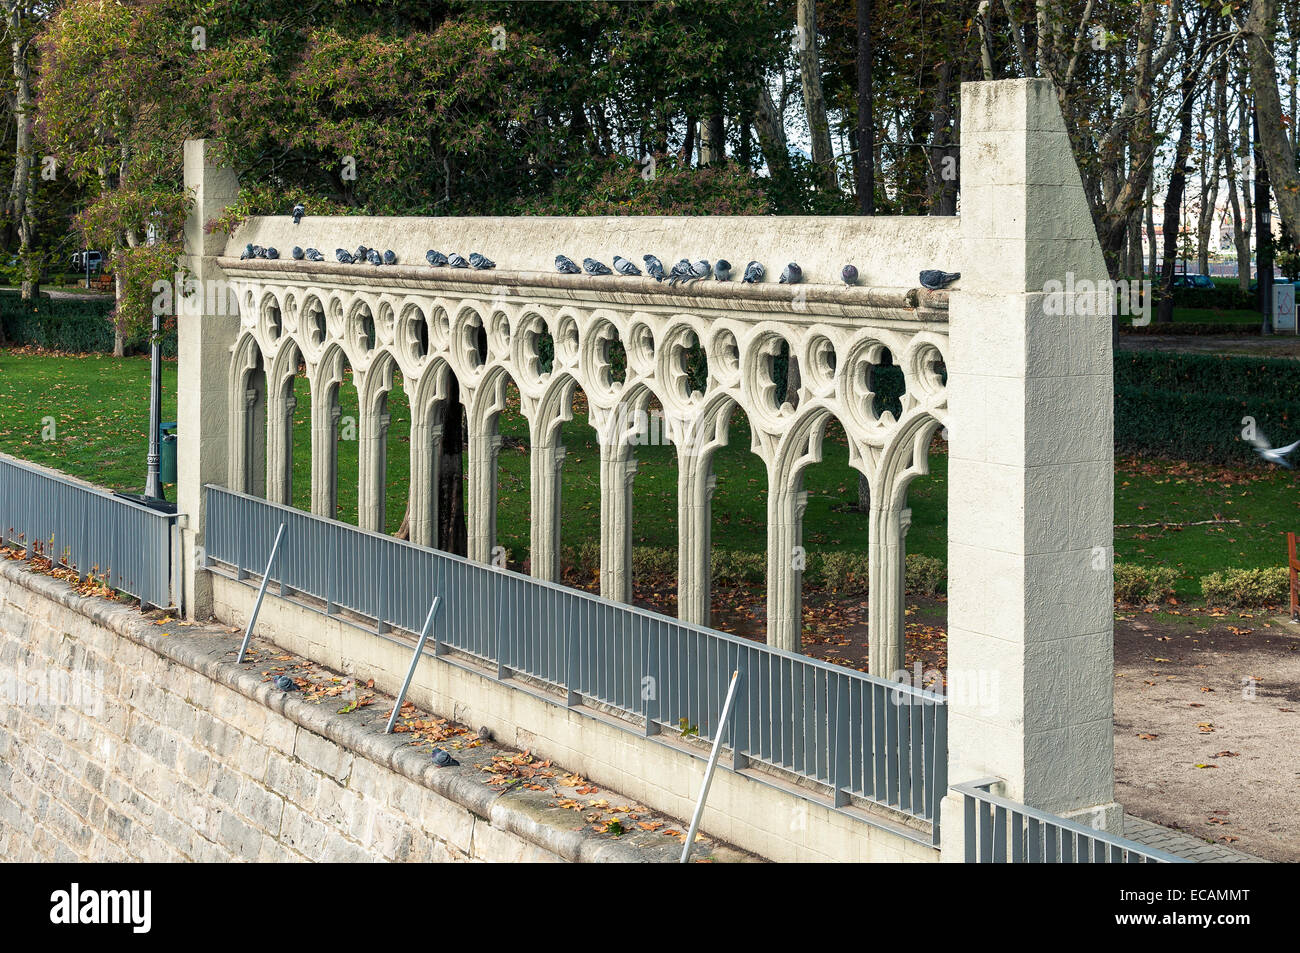 Construction of arches in the moat of the citadel, city gardens of Pamplona, Navarra, Spain. Stock Photo